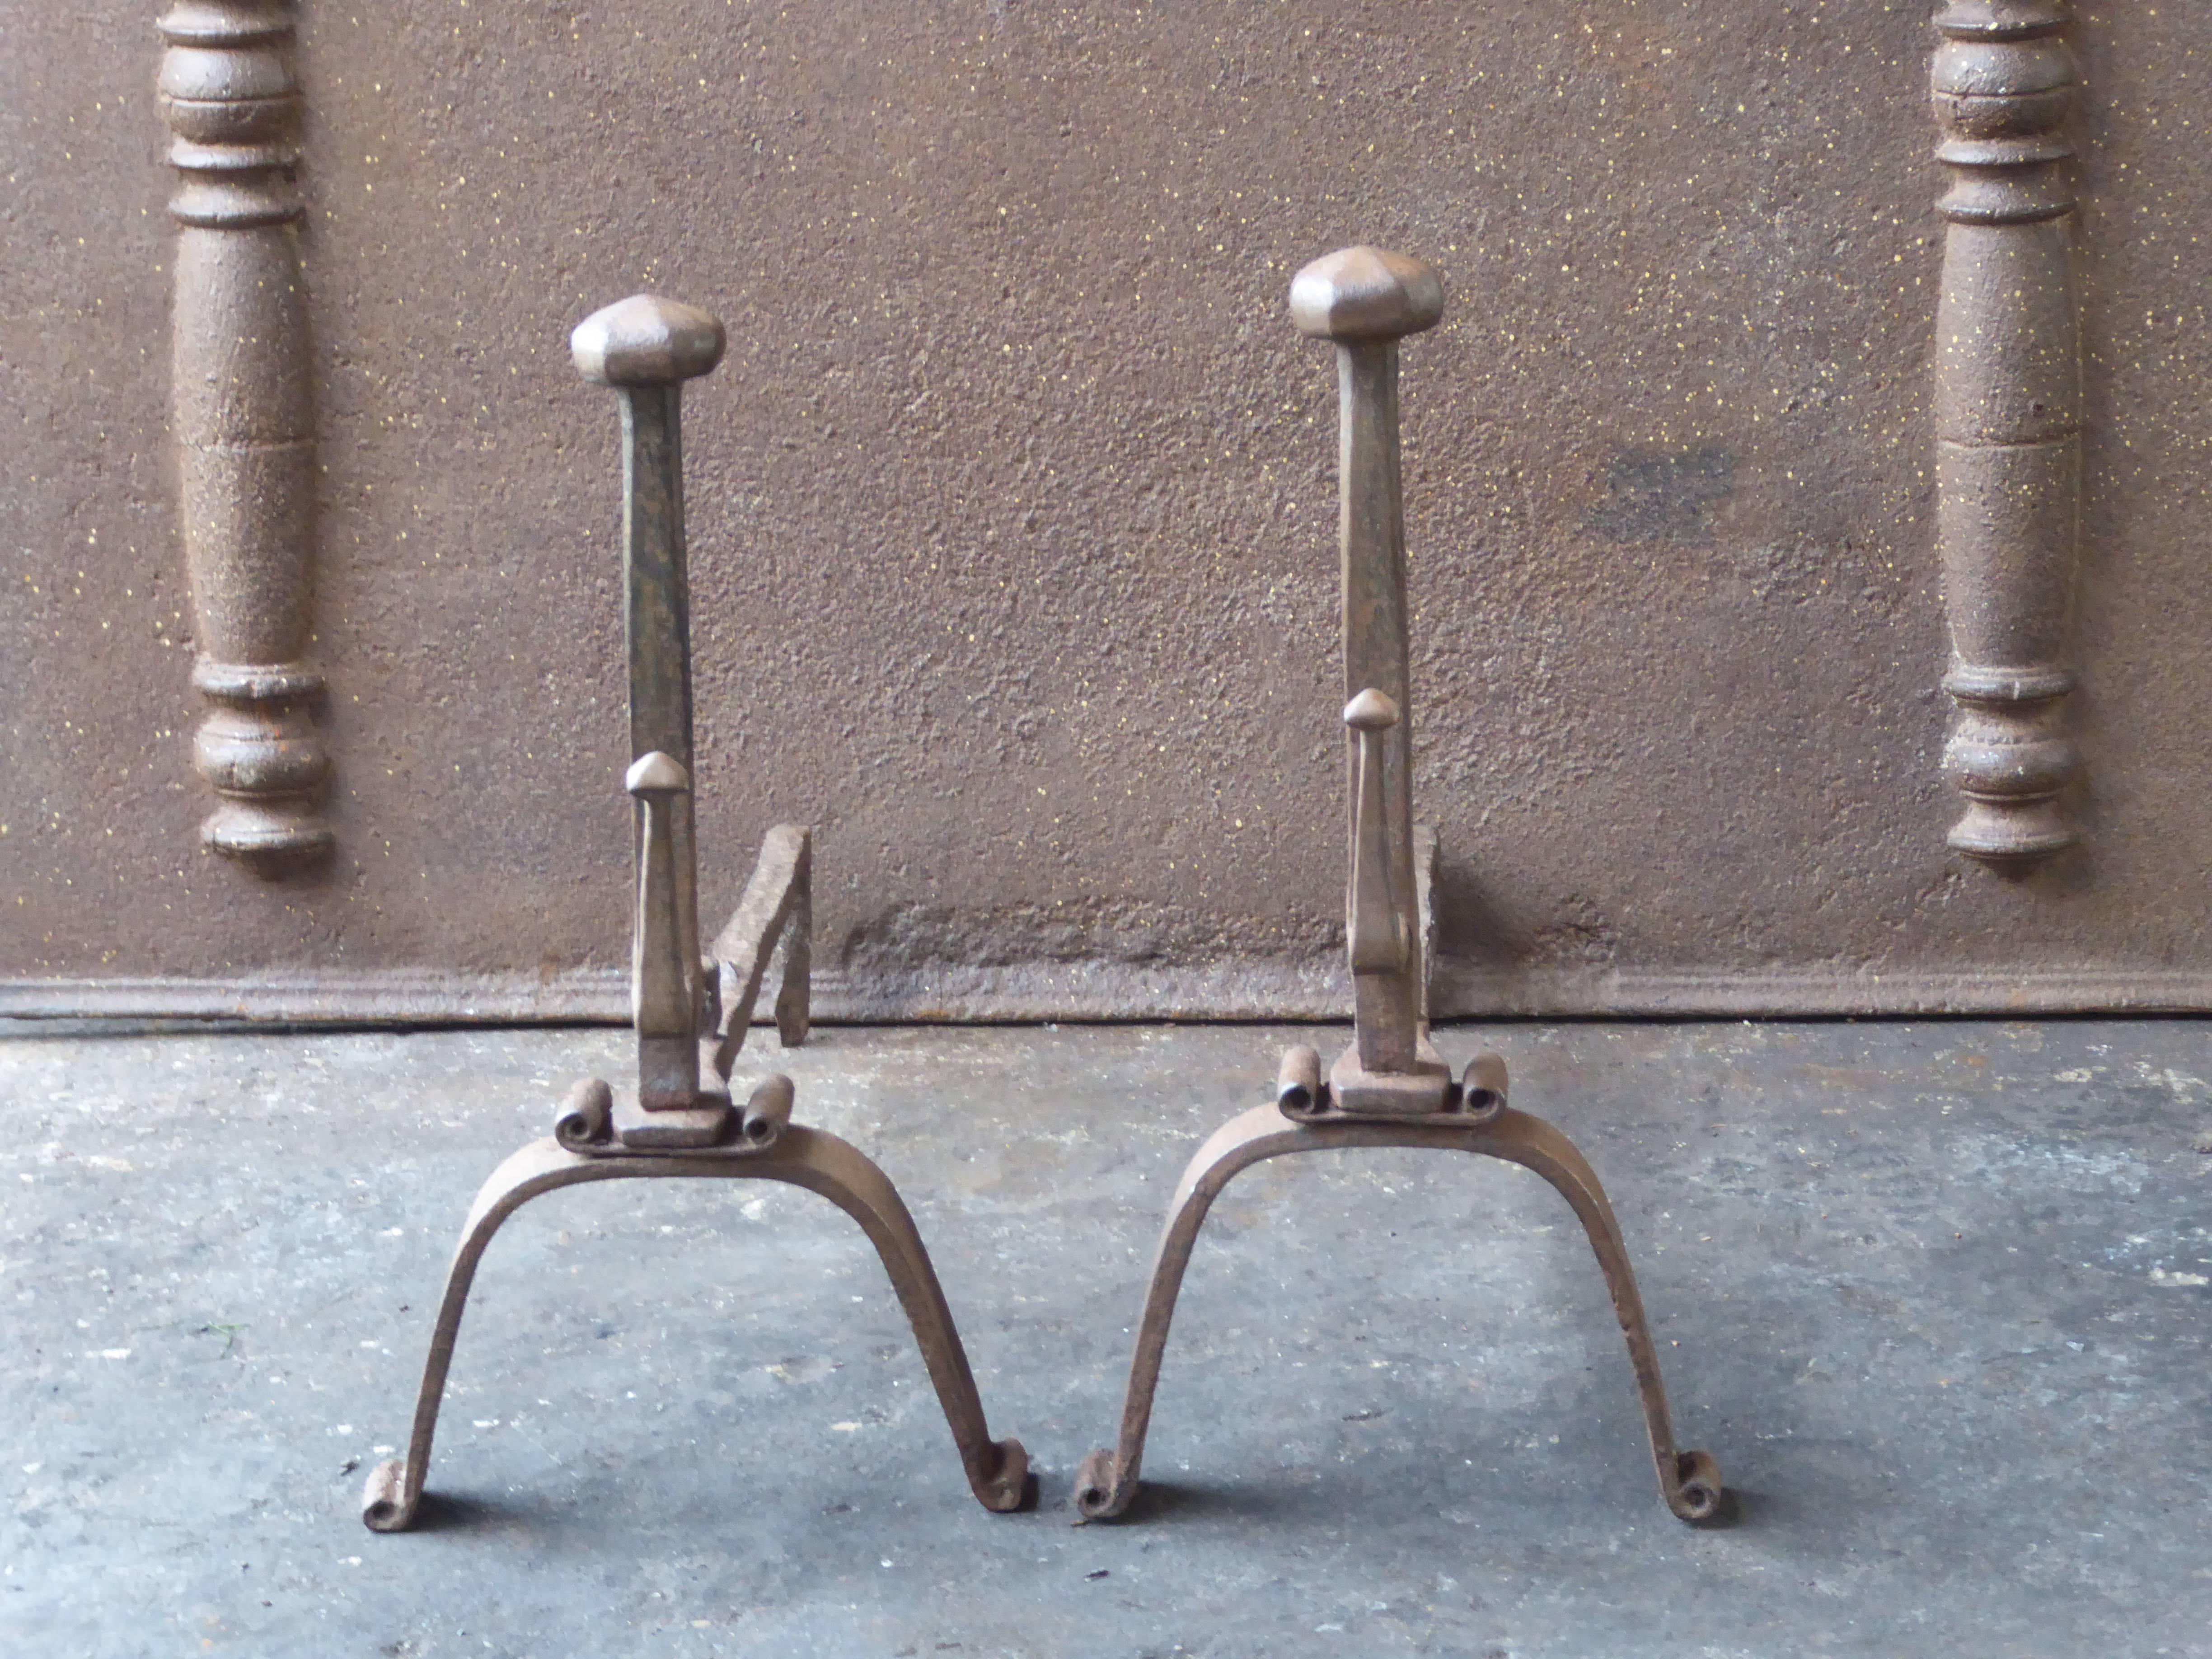 18th century French andirons made of wrought iron. The andirons have spit hooks to grill food. The condition is good.

